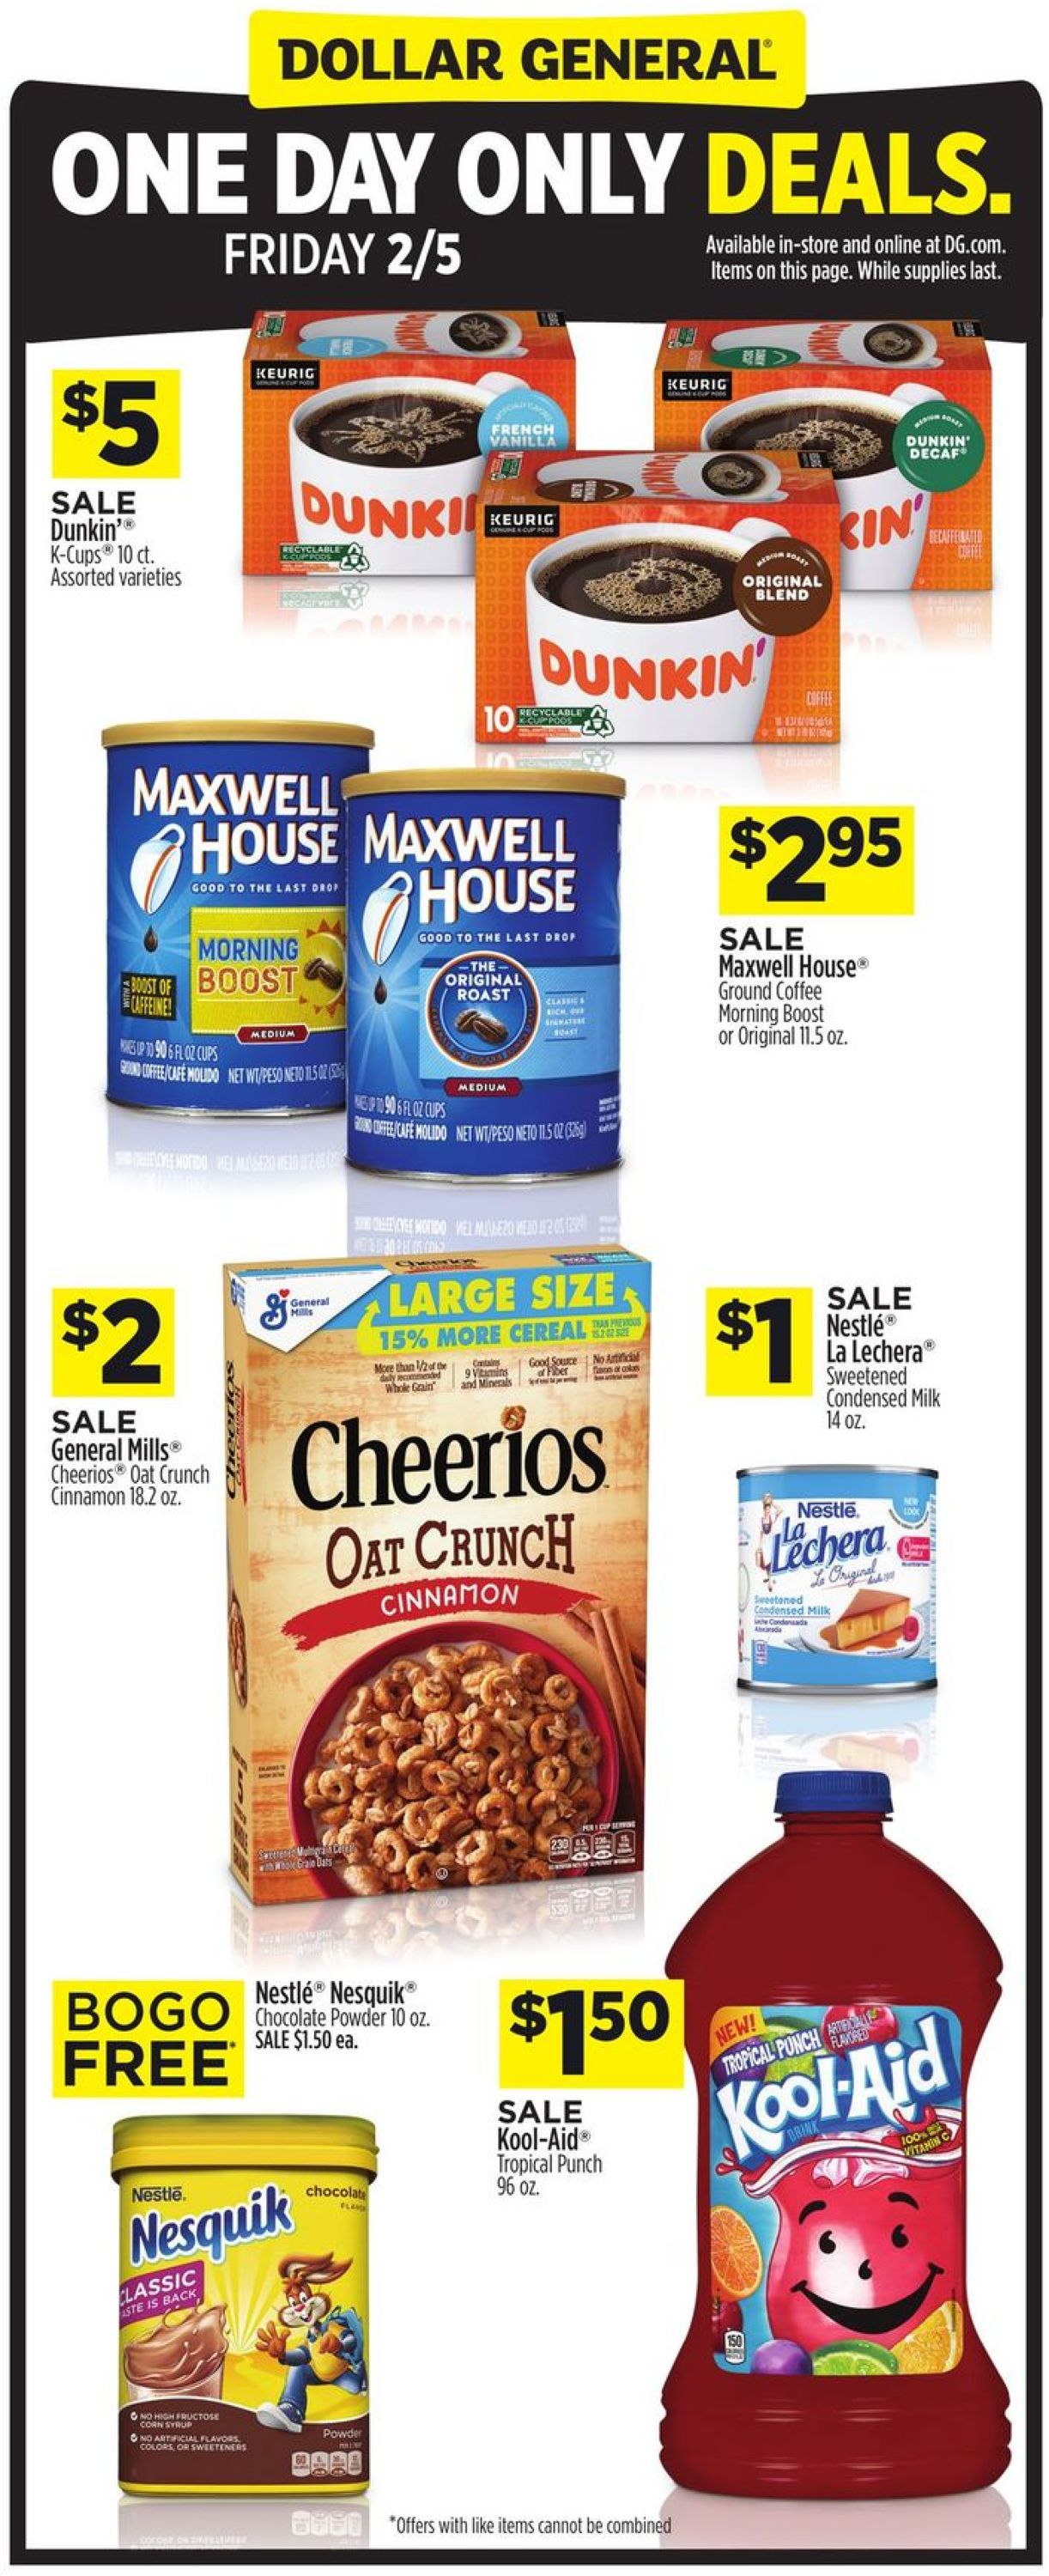 Dollar General One Day Only Deals 2021 Weekly Ad Circular - valid 02/05-02/05/2021